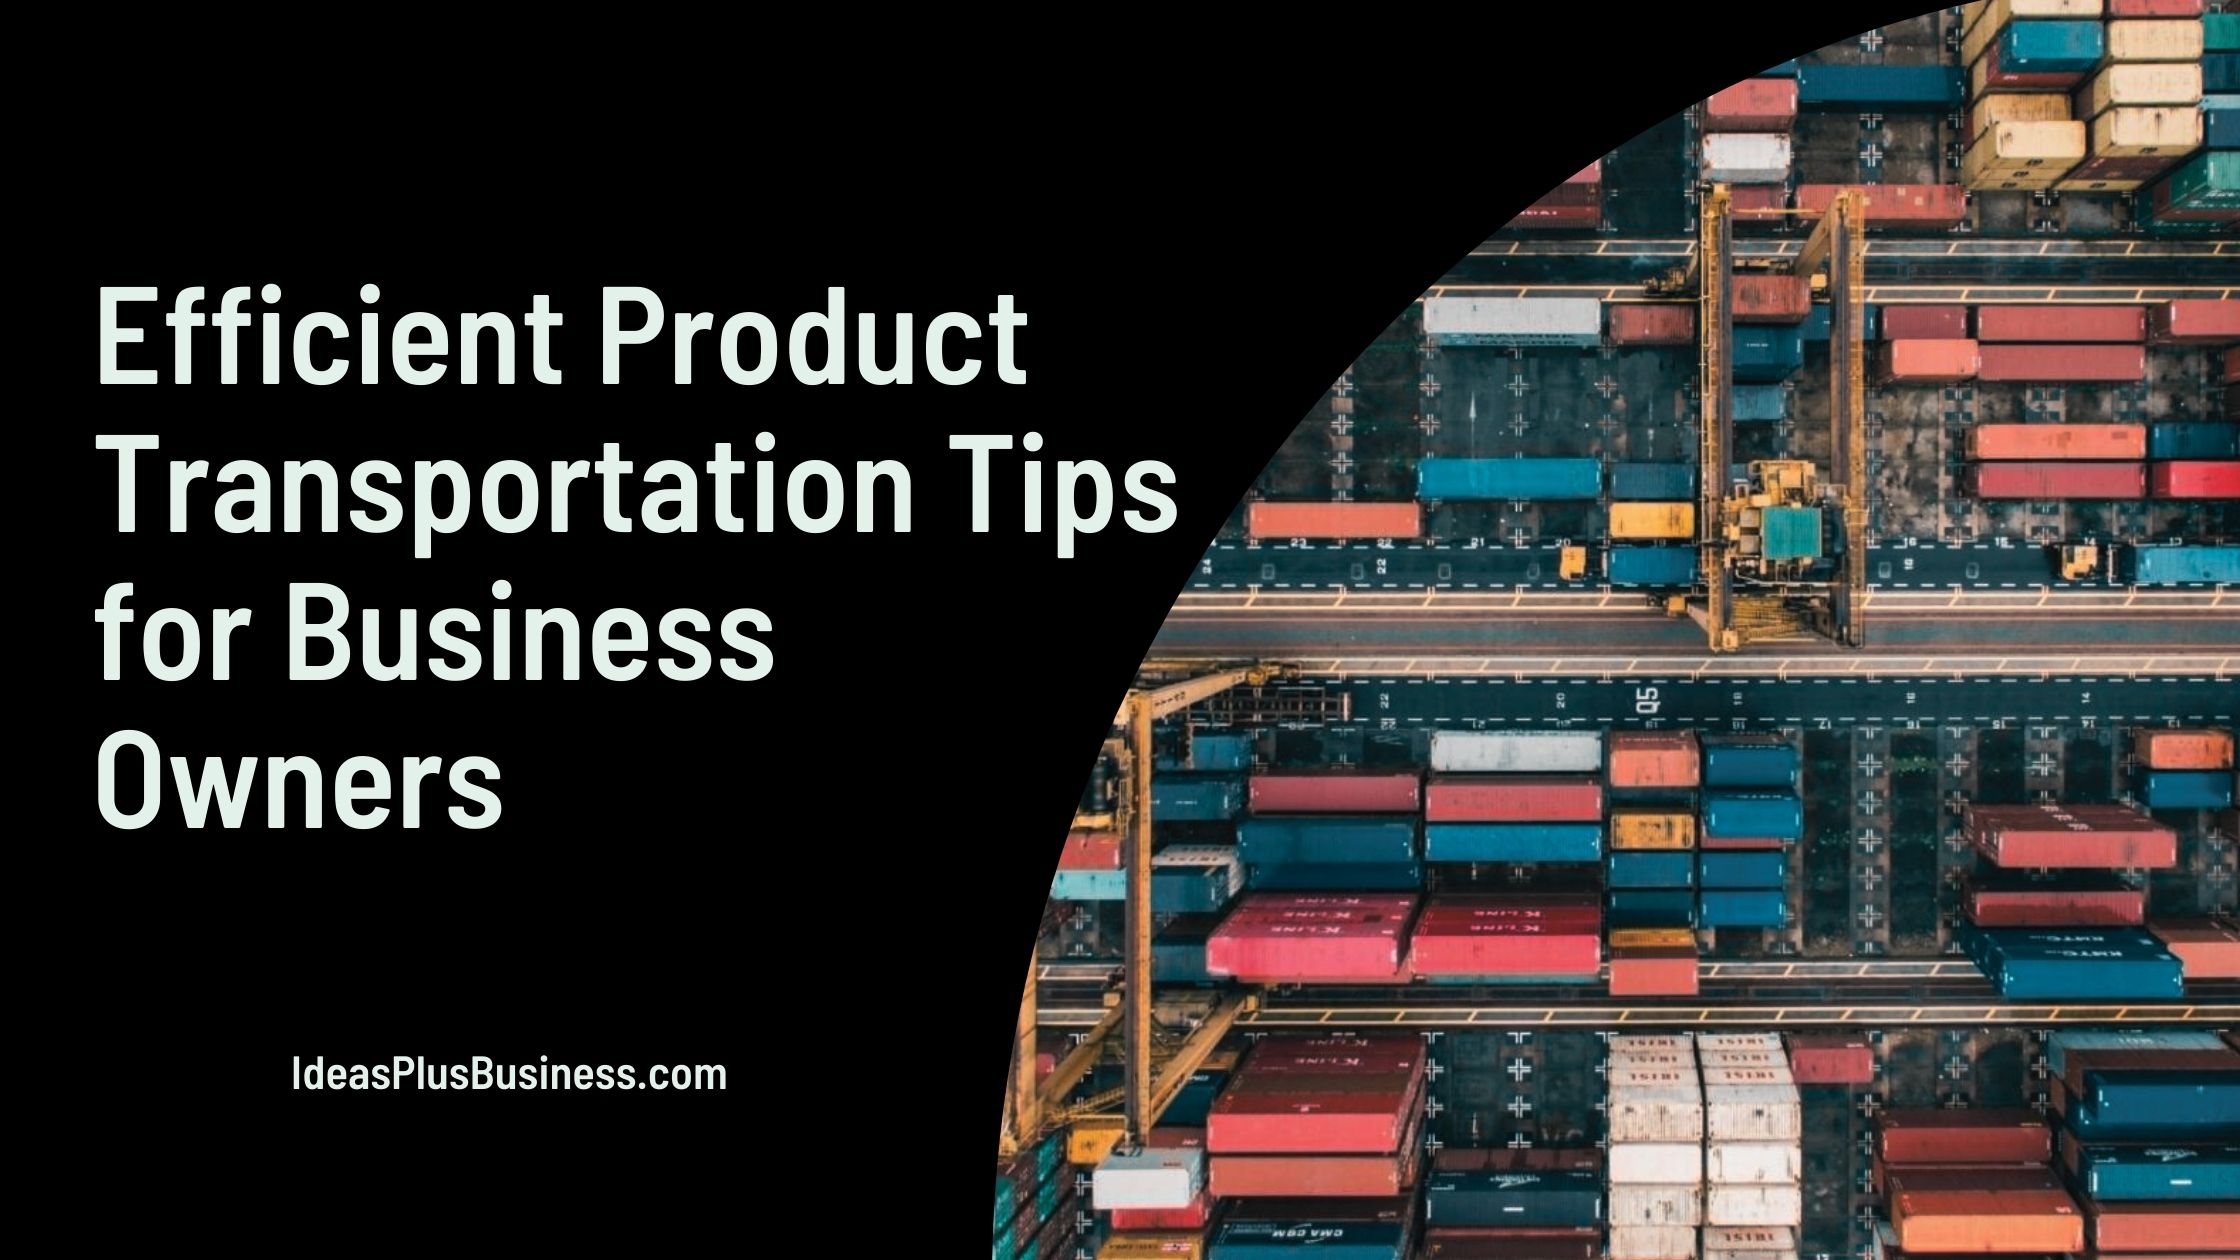 11 Efficient Product Transportation Tips for Business Owners